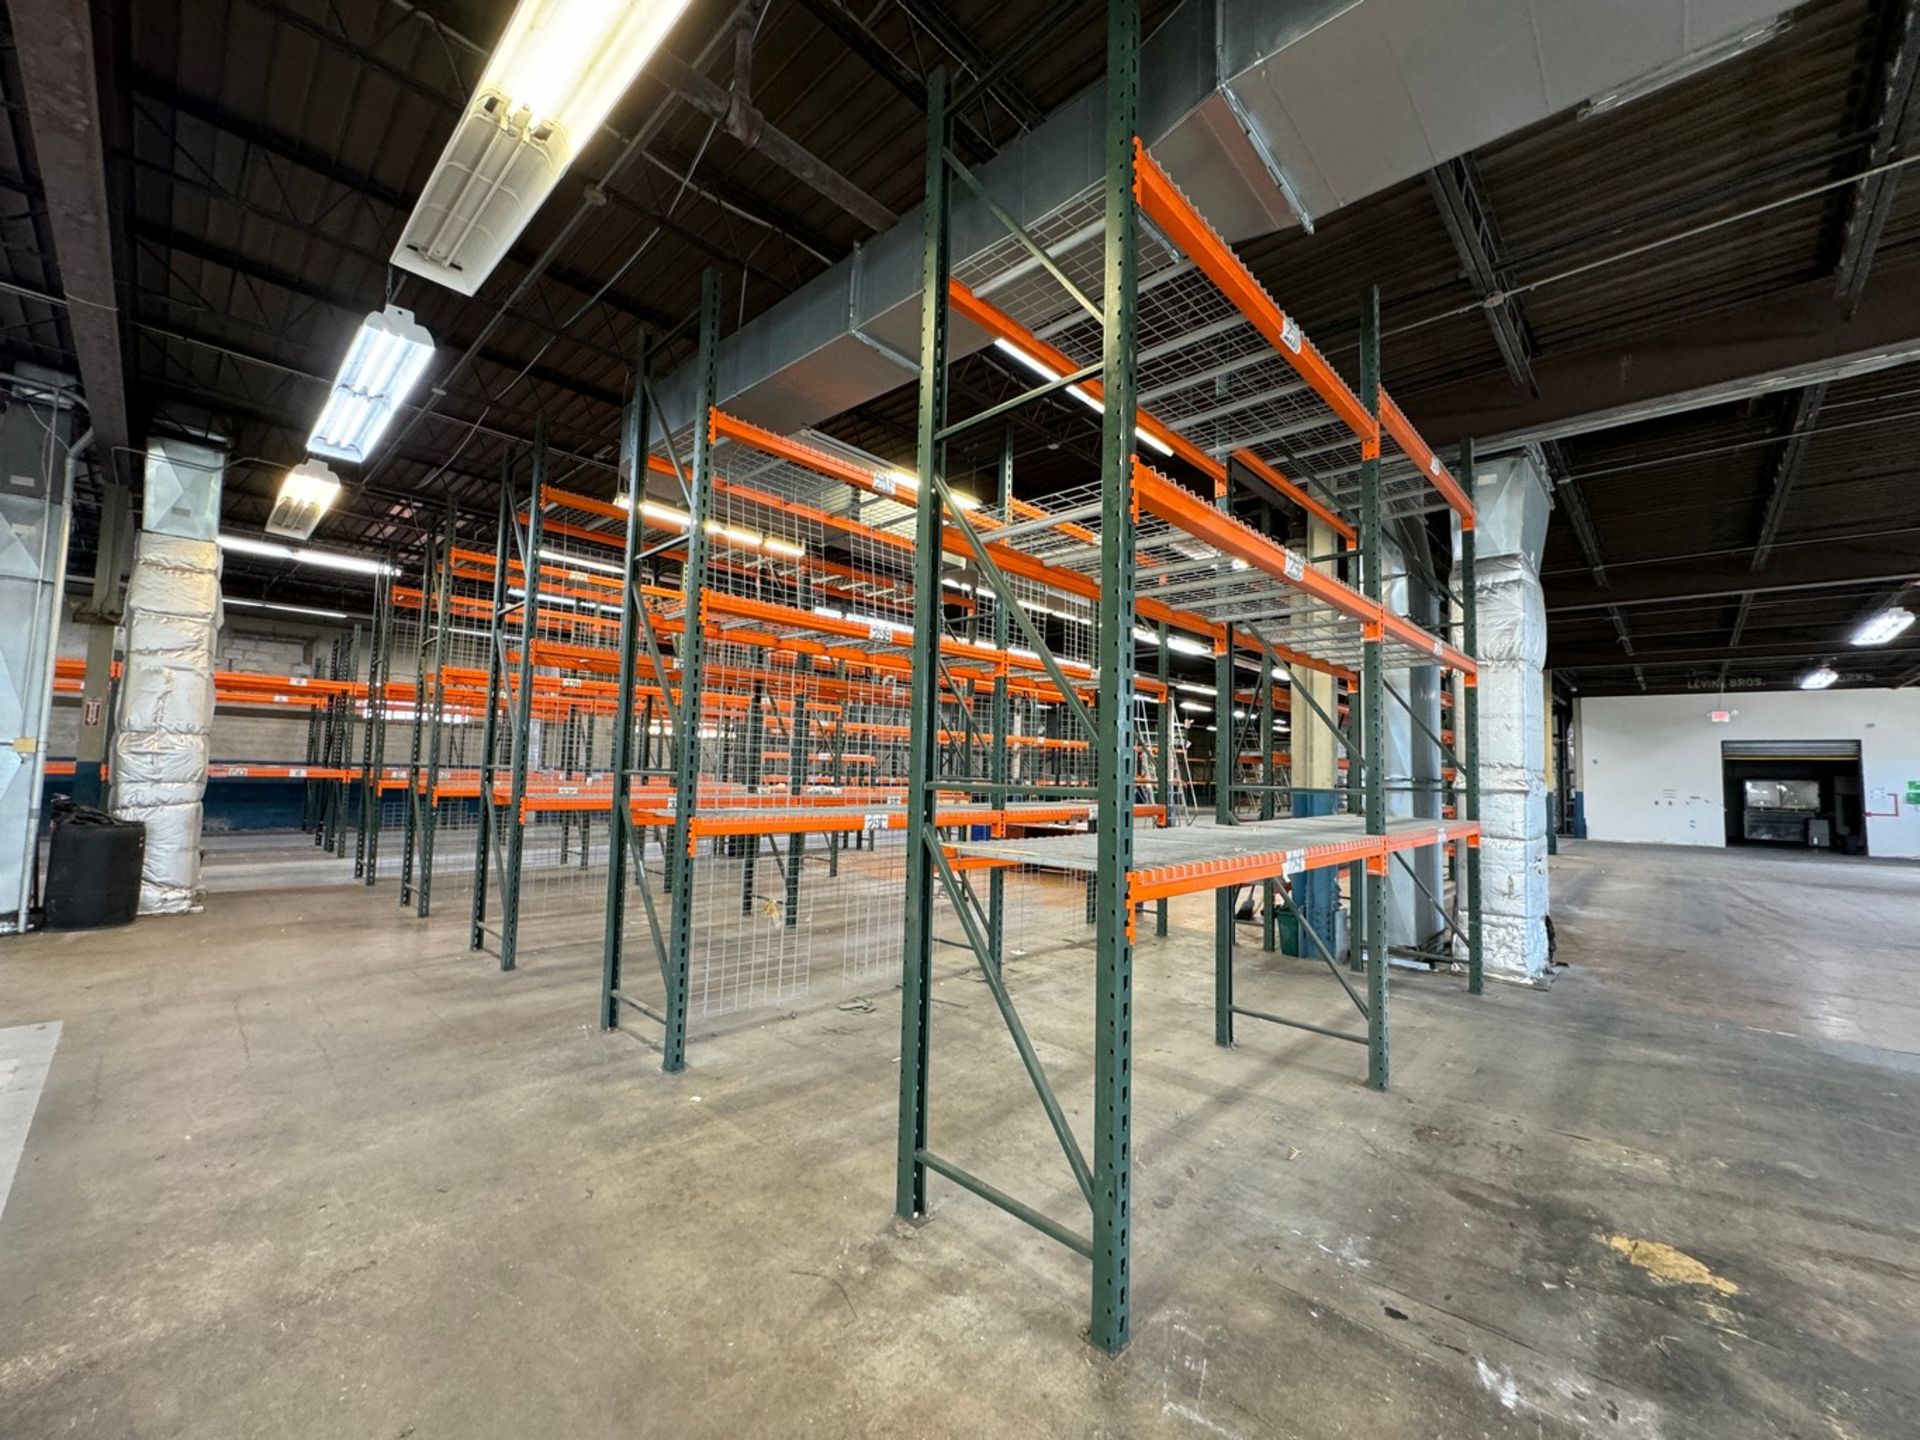 10-Sections Heavy Duty Pallet Racking, 96"W x 36"D x 168"H, 3000 LB Weight Capacity - Image 4 of 4